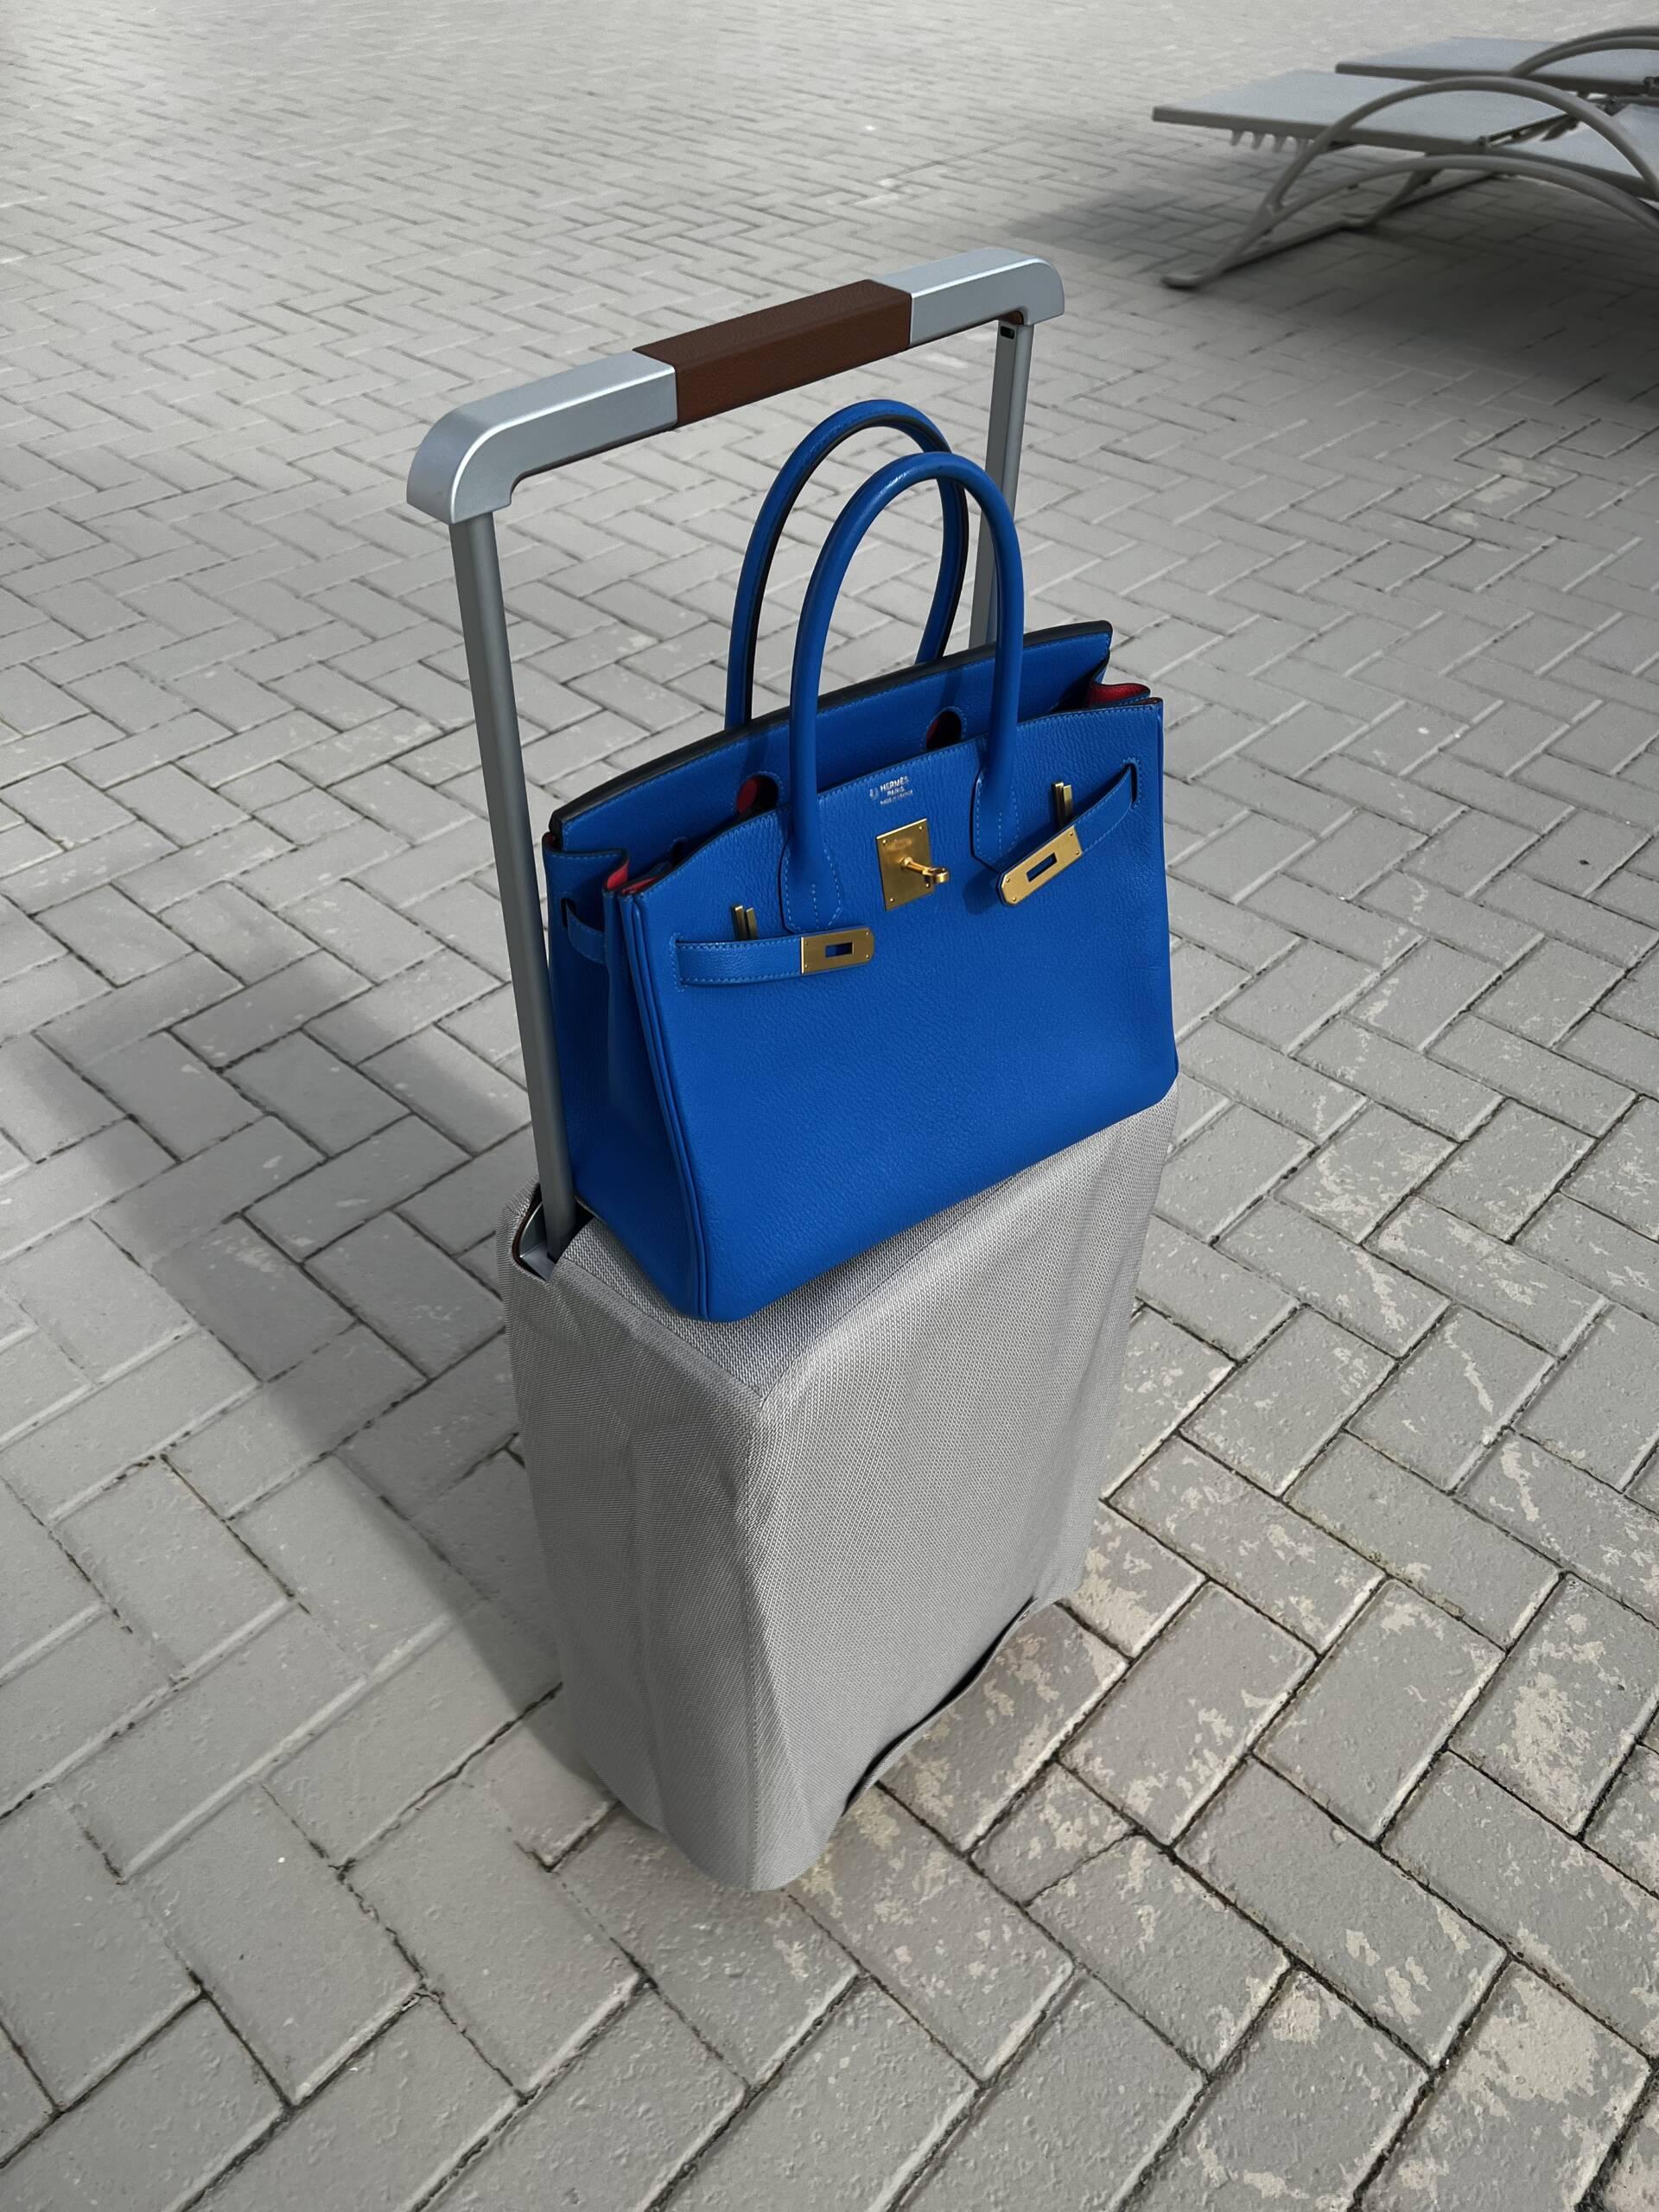 Hermes RMS (Rolling Mobility Suitcase) Multicolour